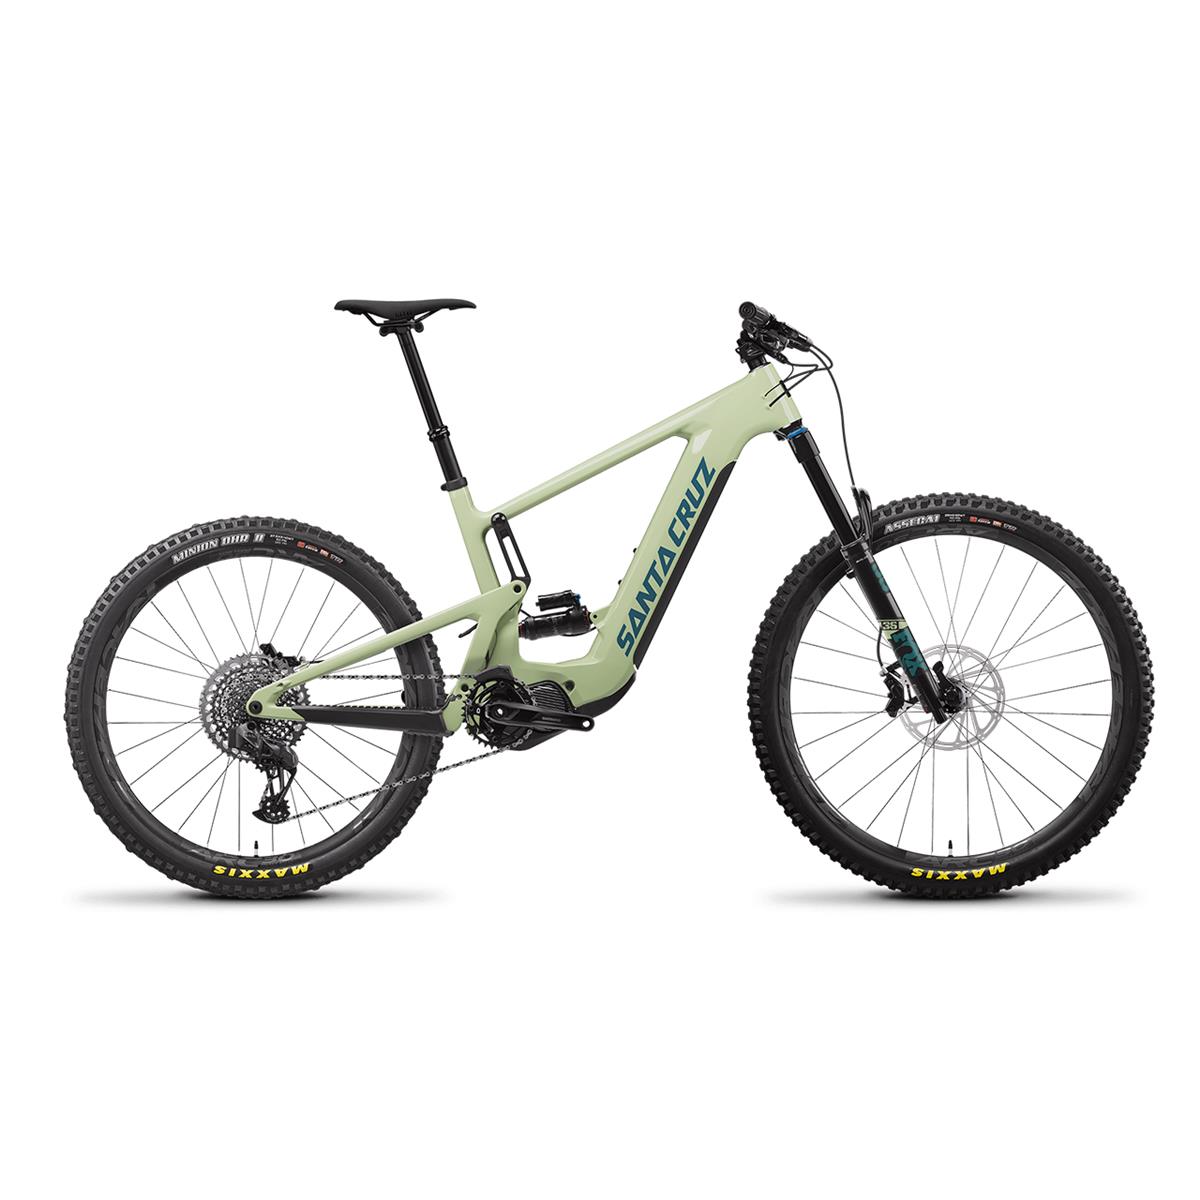 Heckler 9 C MX GX AXS 29/27.5'' 160mm 12s 720Wh Shimano EP8 Verde Aguacate 2023 Talla M